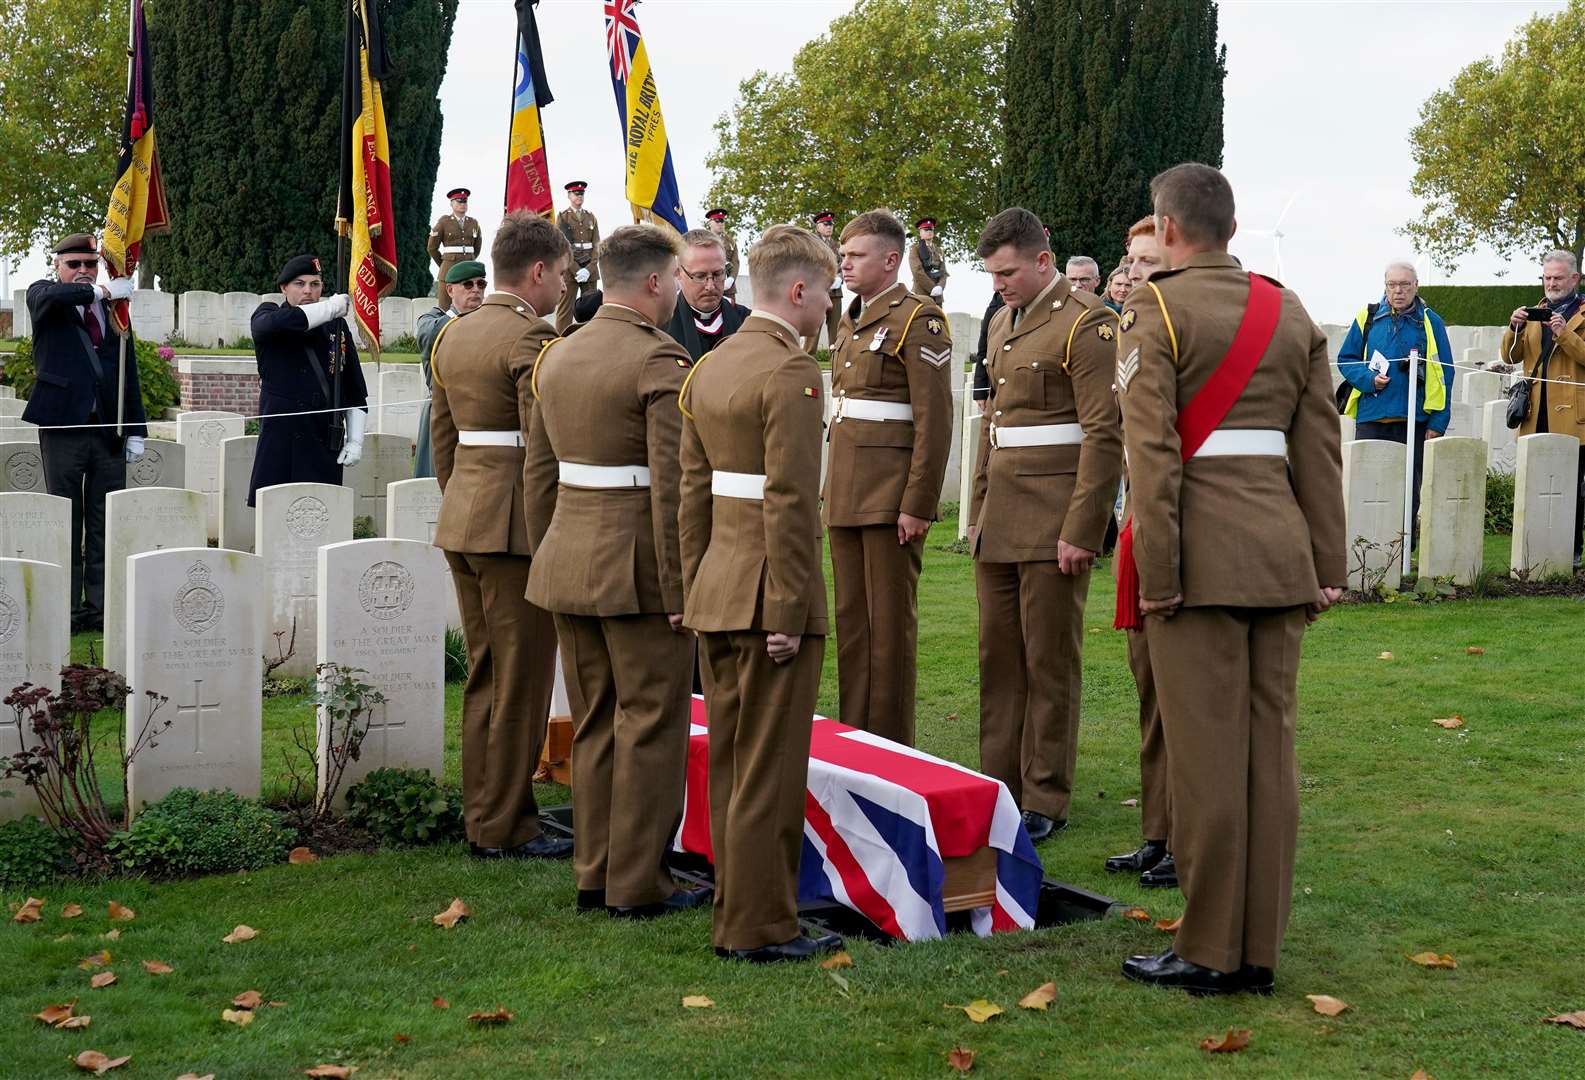 Yorkshire-born Lance Corporal Robert Cook is laid to rest with full military honours (Gareth Fuller/PA)